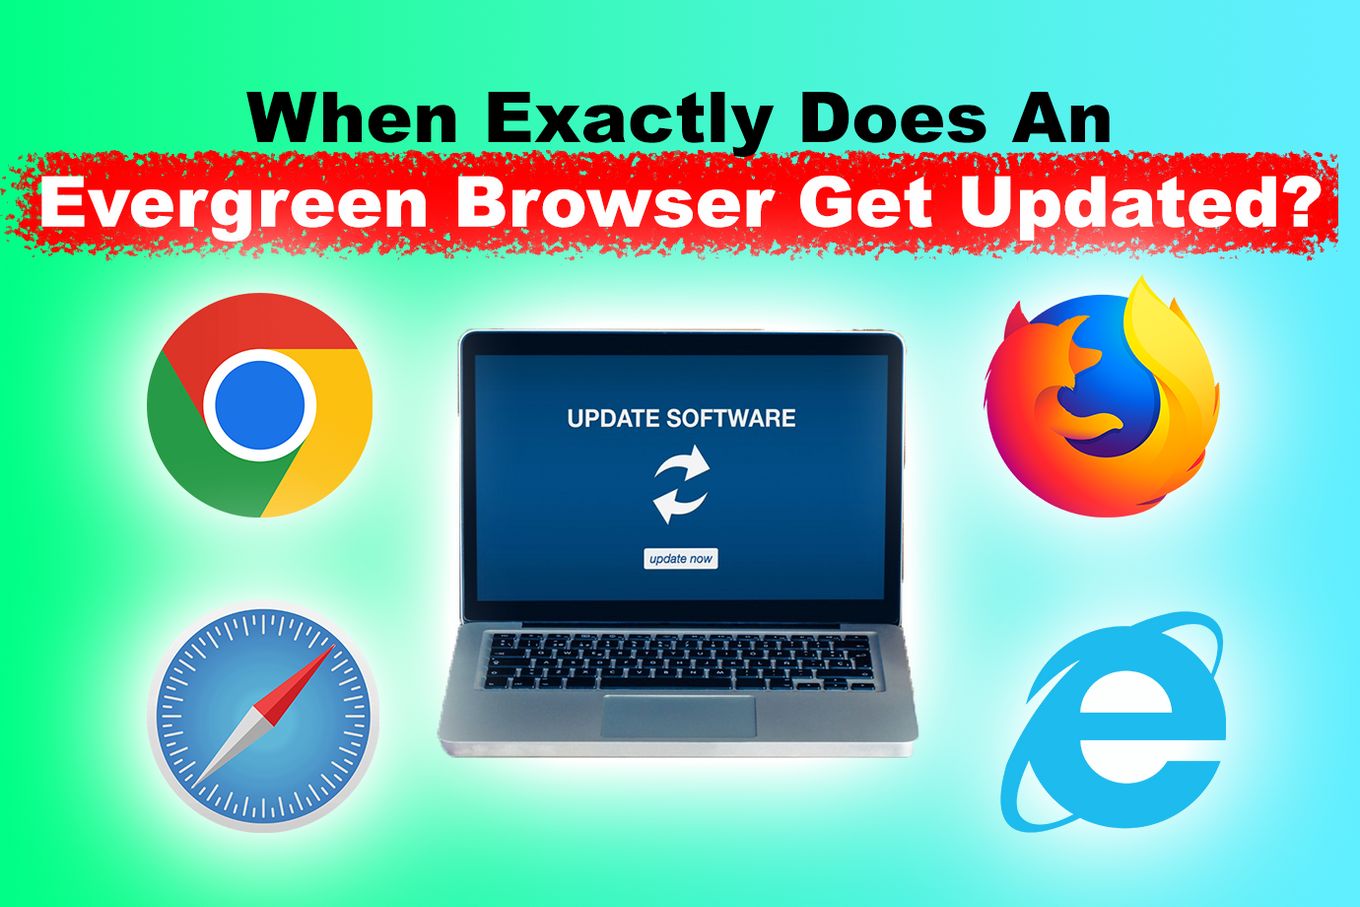 When Do Evergreen Browsers Get Updated?